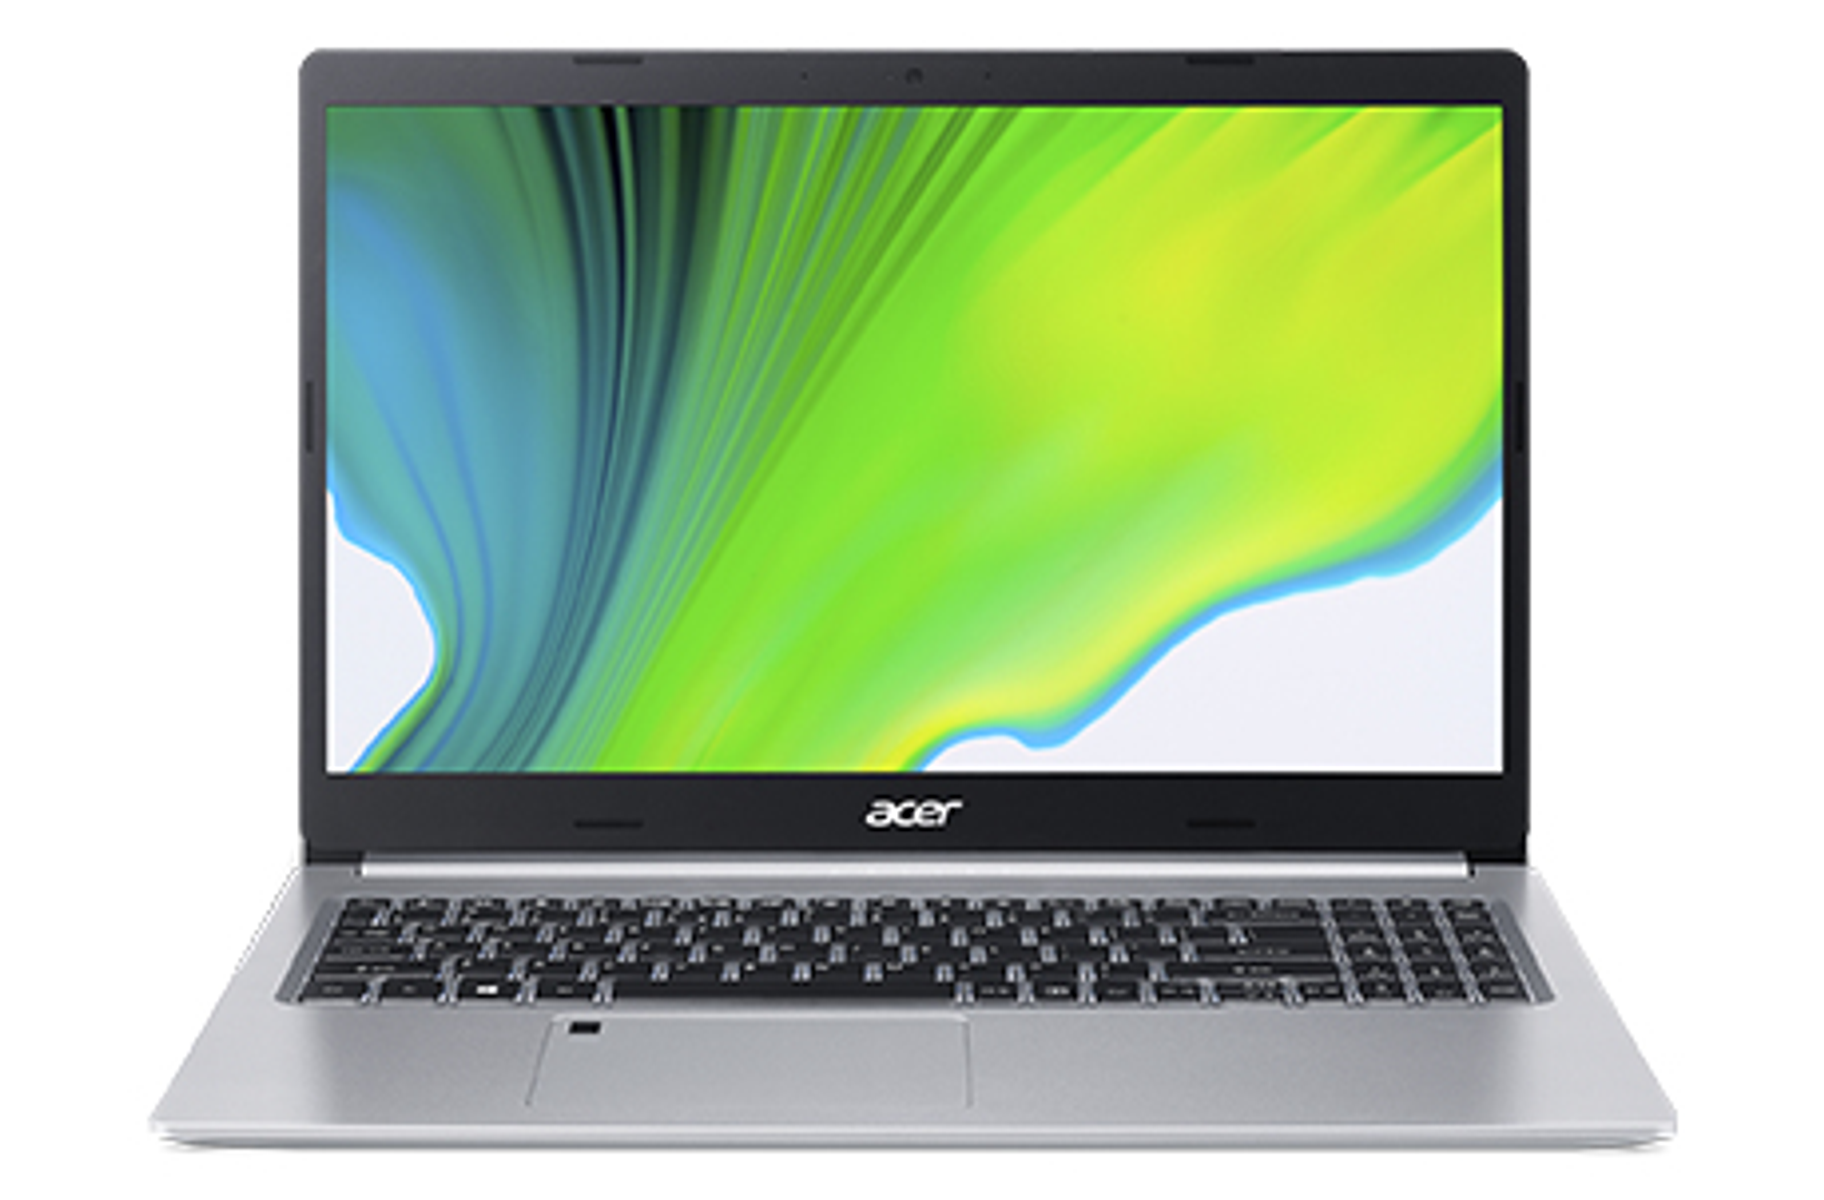 mit i5 15,60 Zoll Prozessor, Core™ SSD, Silber Notebook ACER Display, RAM, 256 AMD GB A515-44-R0NR, 8 GB